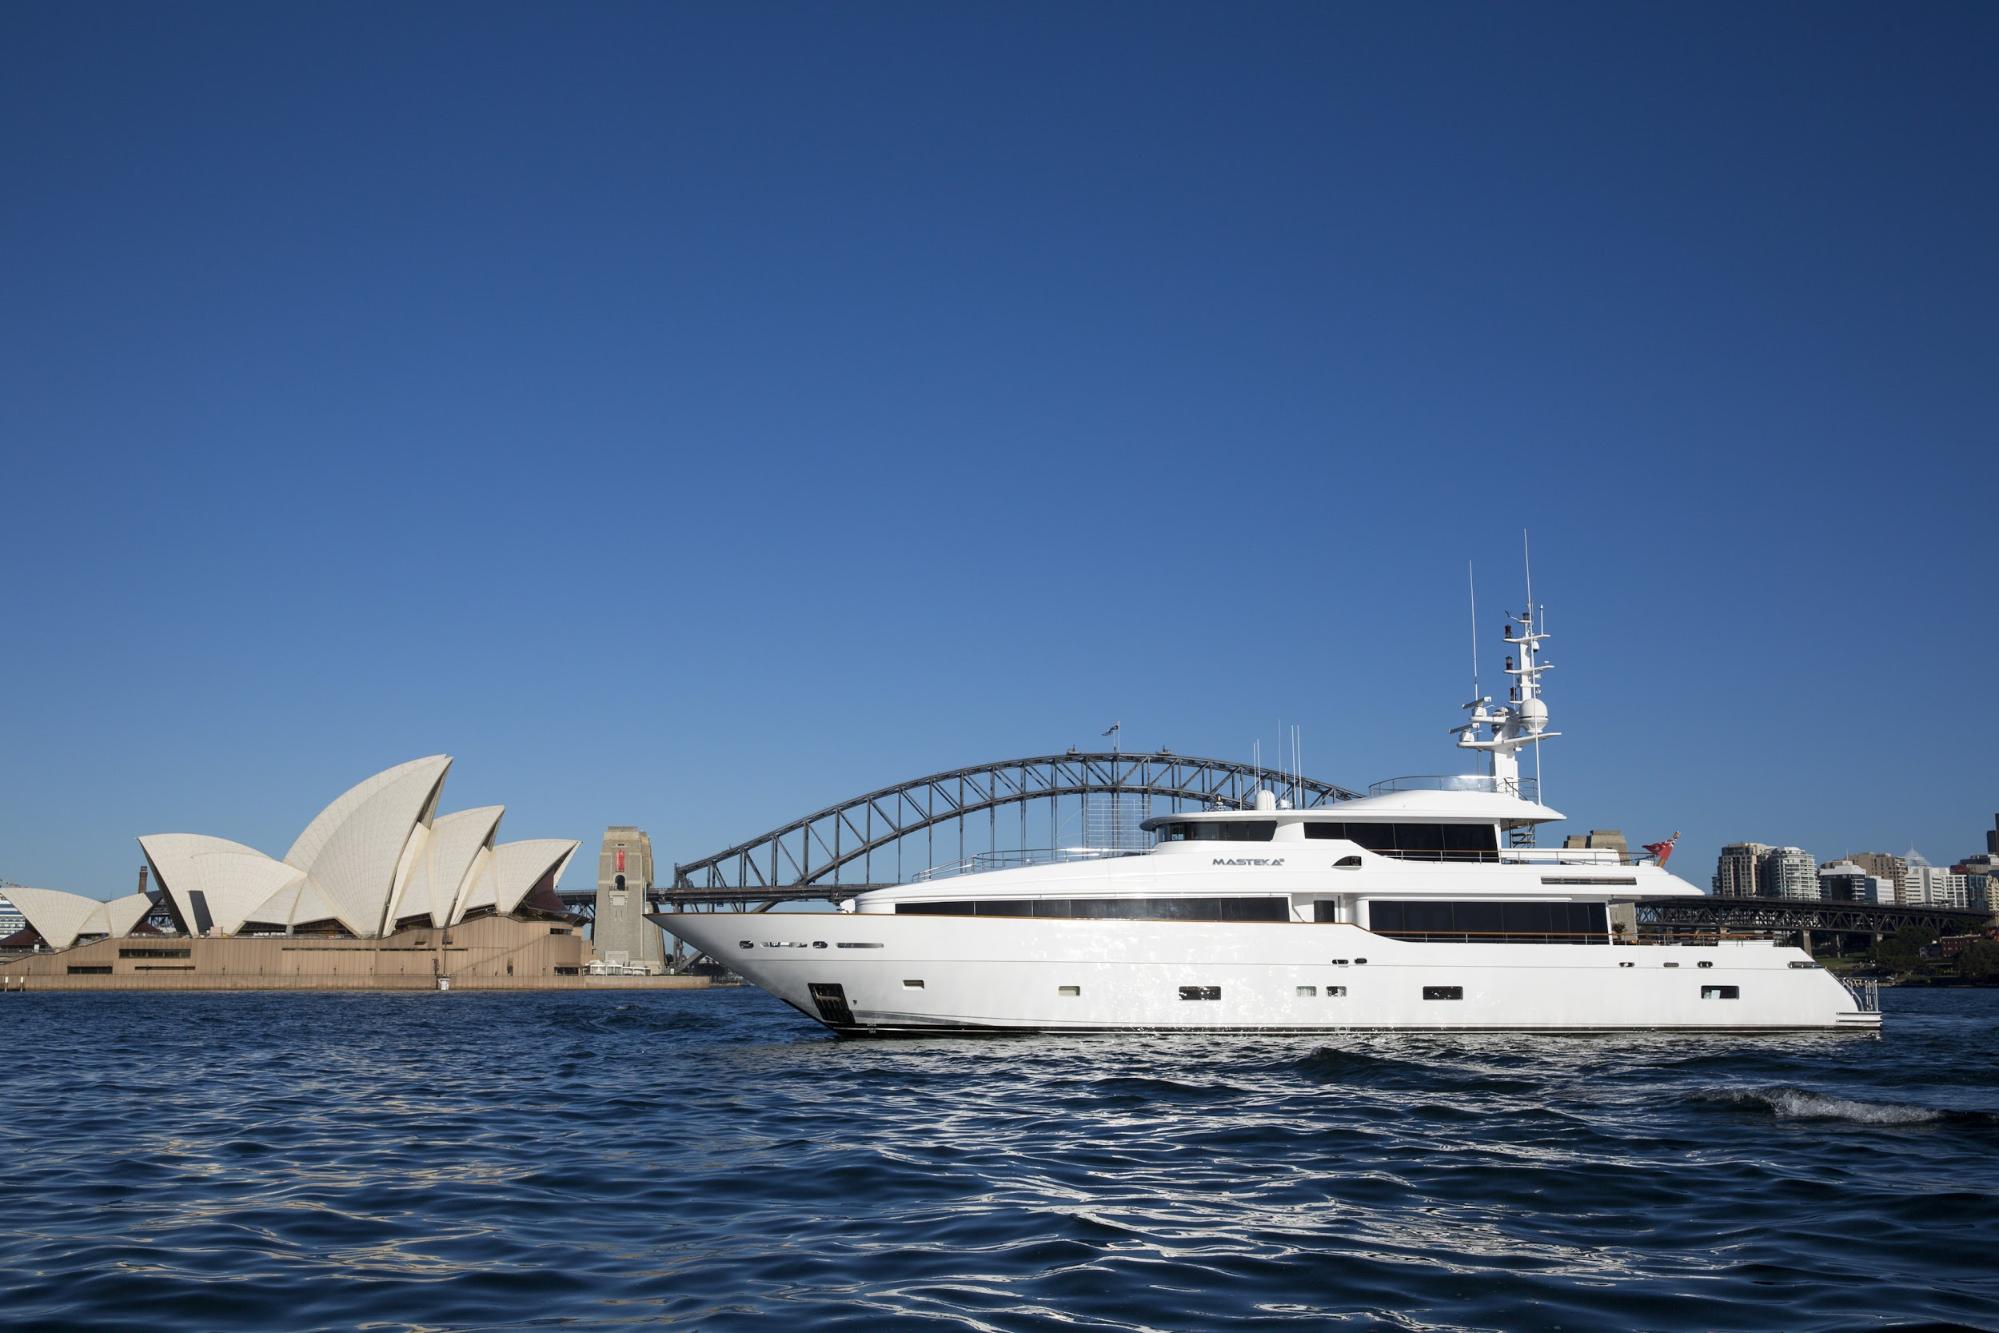 Climb aboard the superyacht Masteka and watch the excitement unfold in Sydney Harbour.